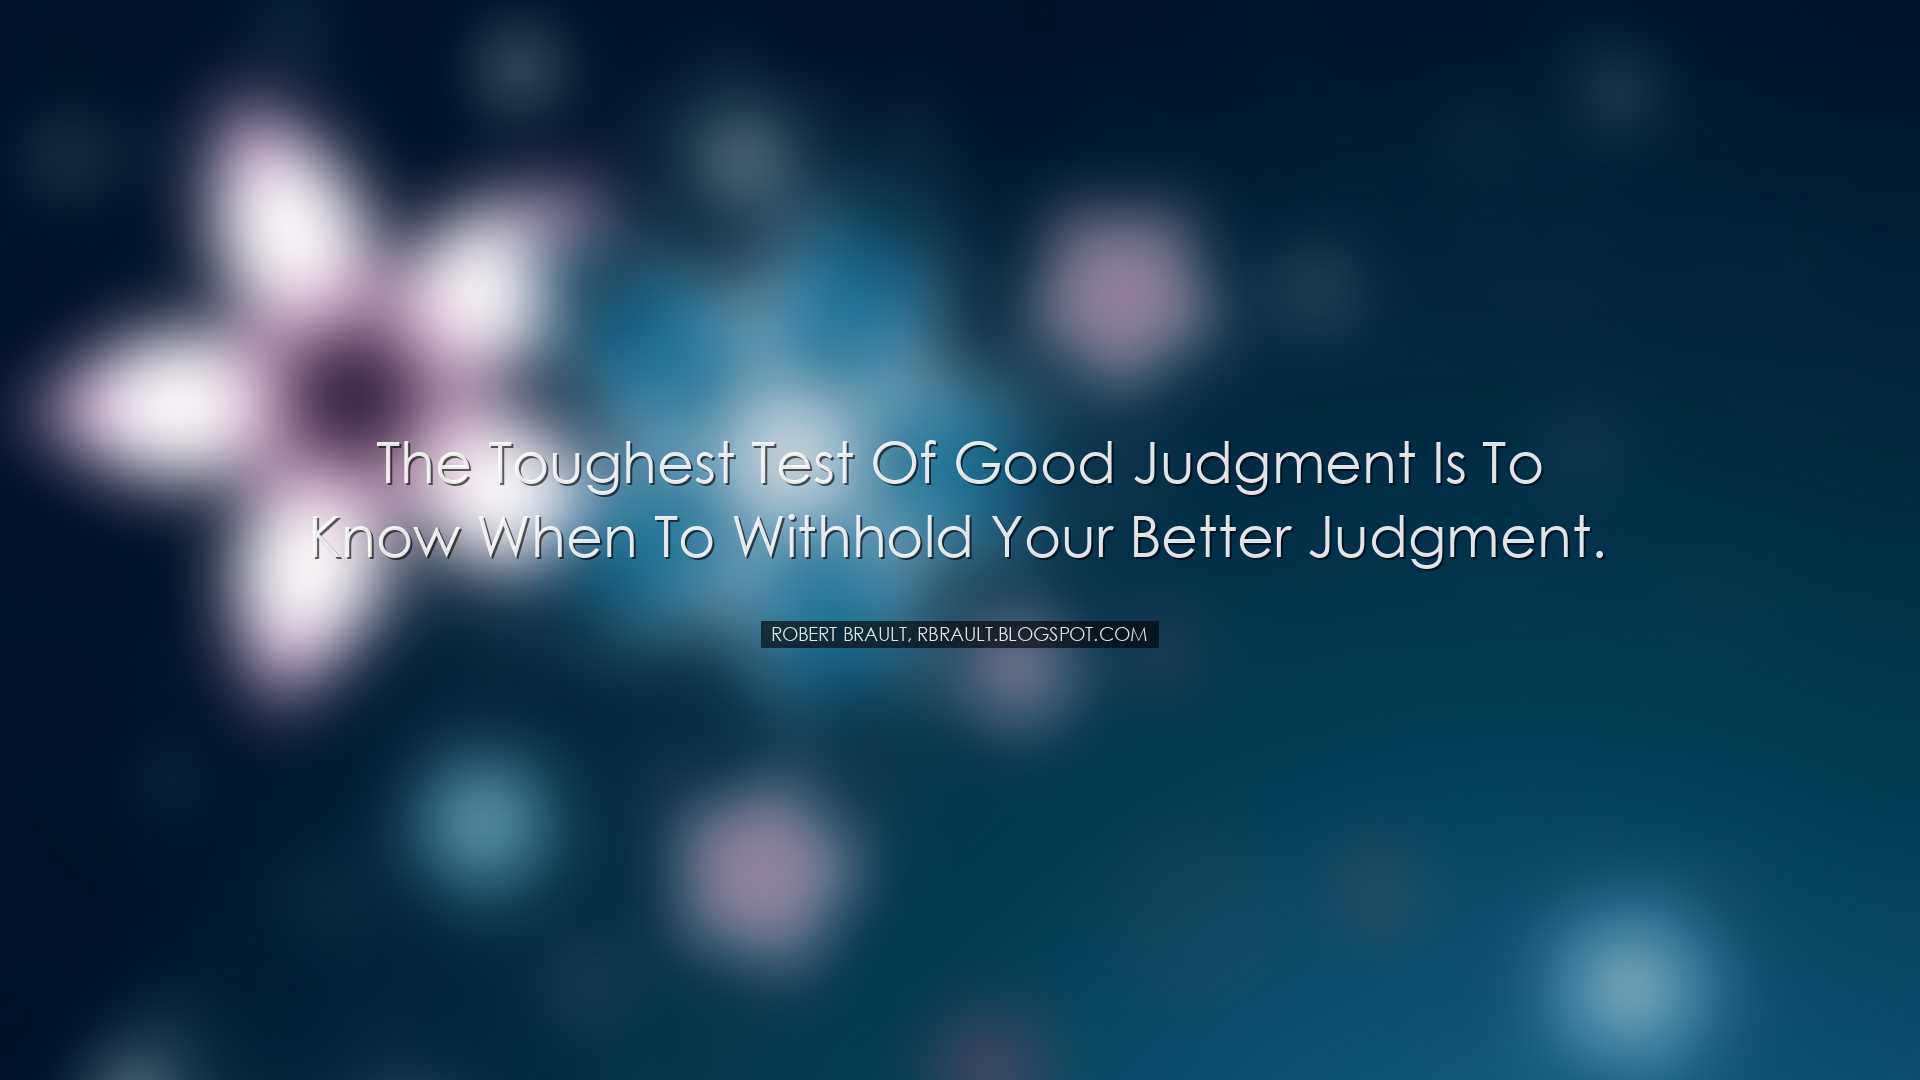 The toughest test of good judgment is to know when to withhold you